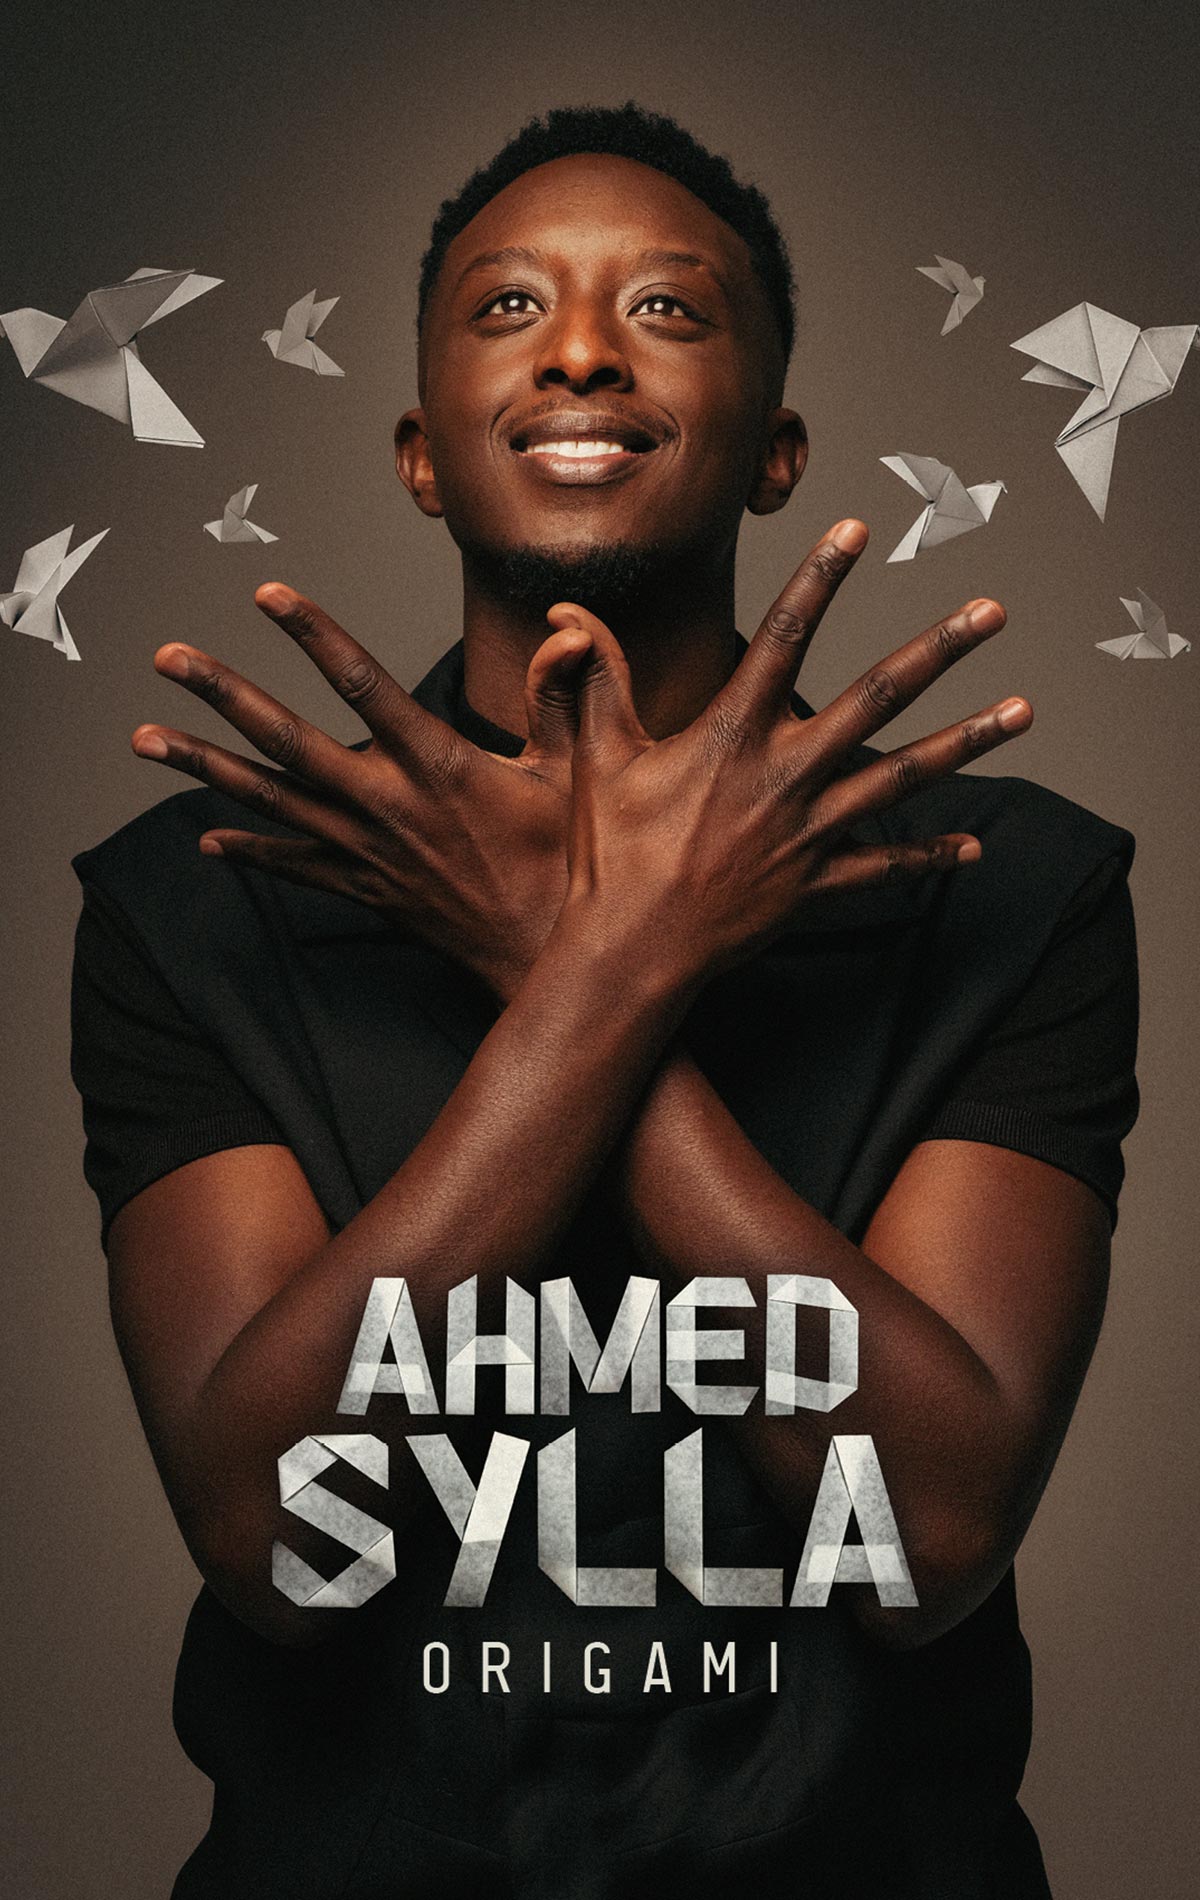 Ahmed Sylla at Parc Des Expositions Chalons En Champagne Tickets